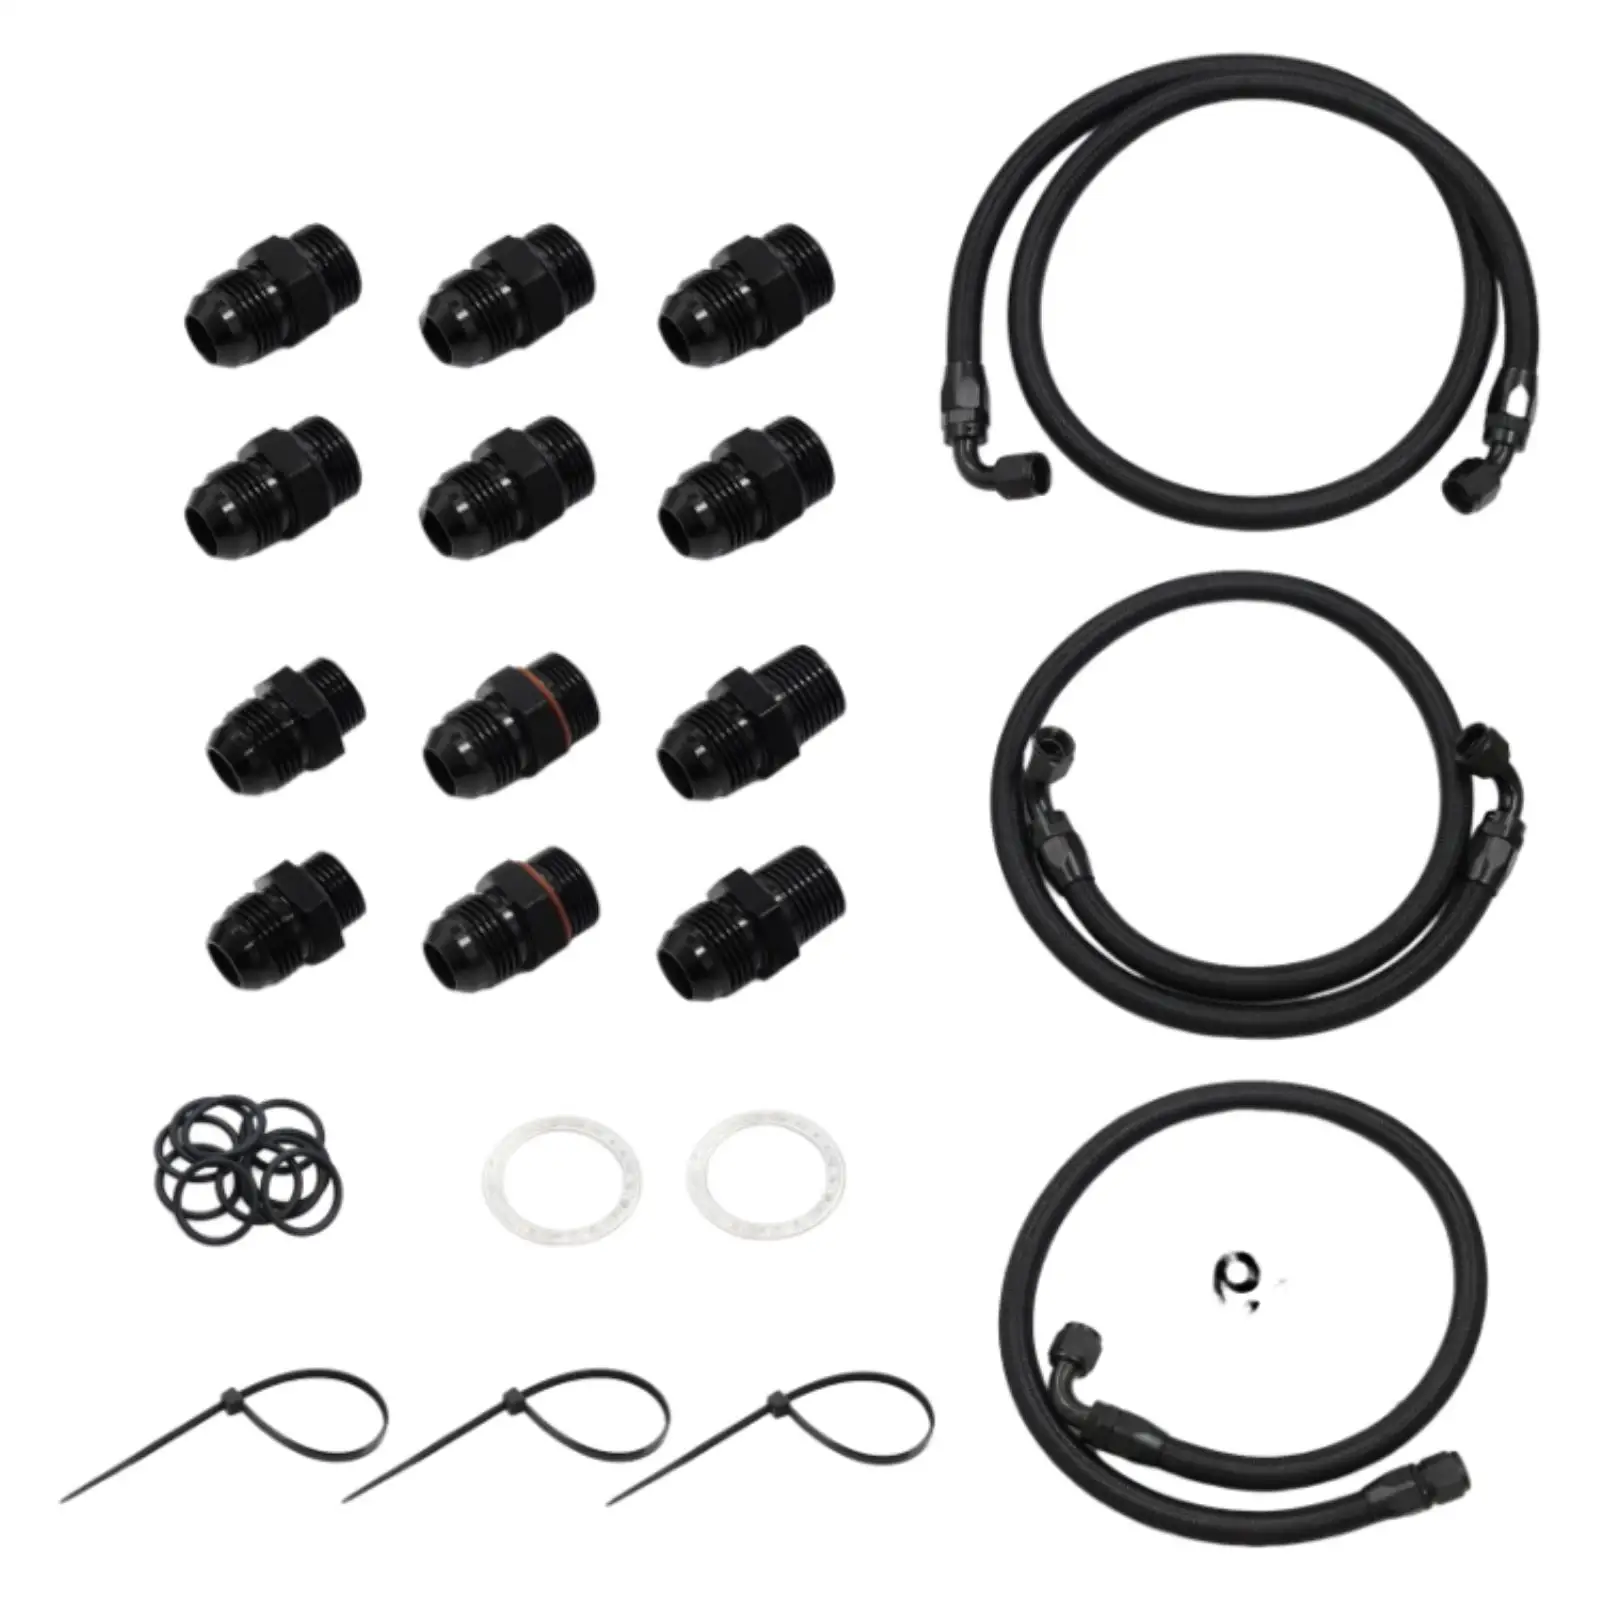 Transmission Cooler Lines Kit Prevent Leaks with Adapters Heavy Duty Transmission Cooler Hose Fittings for GM 2001 to 2005